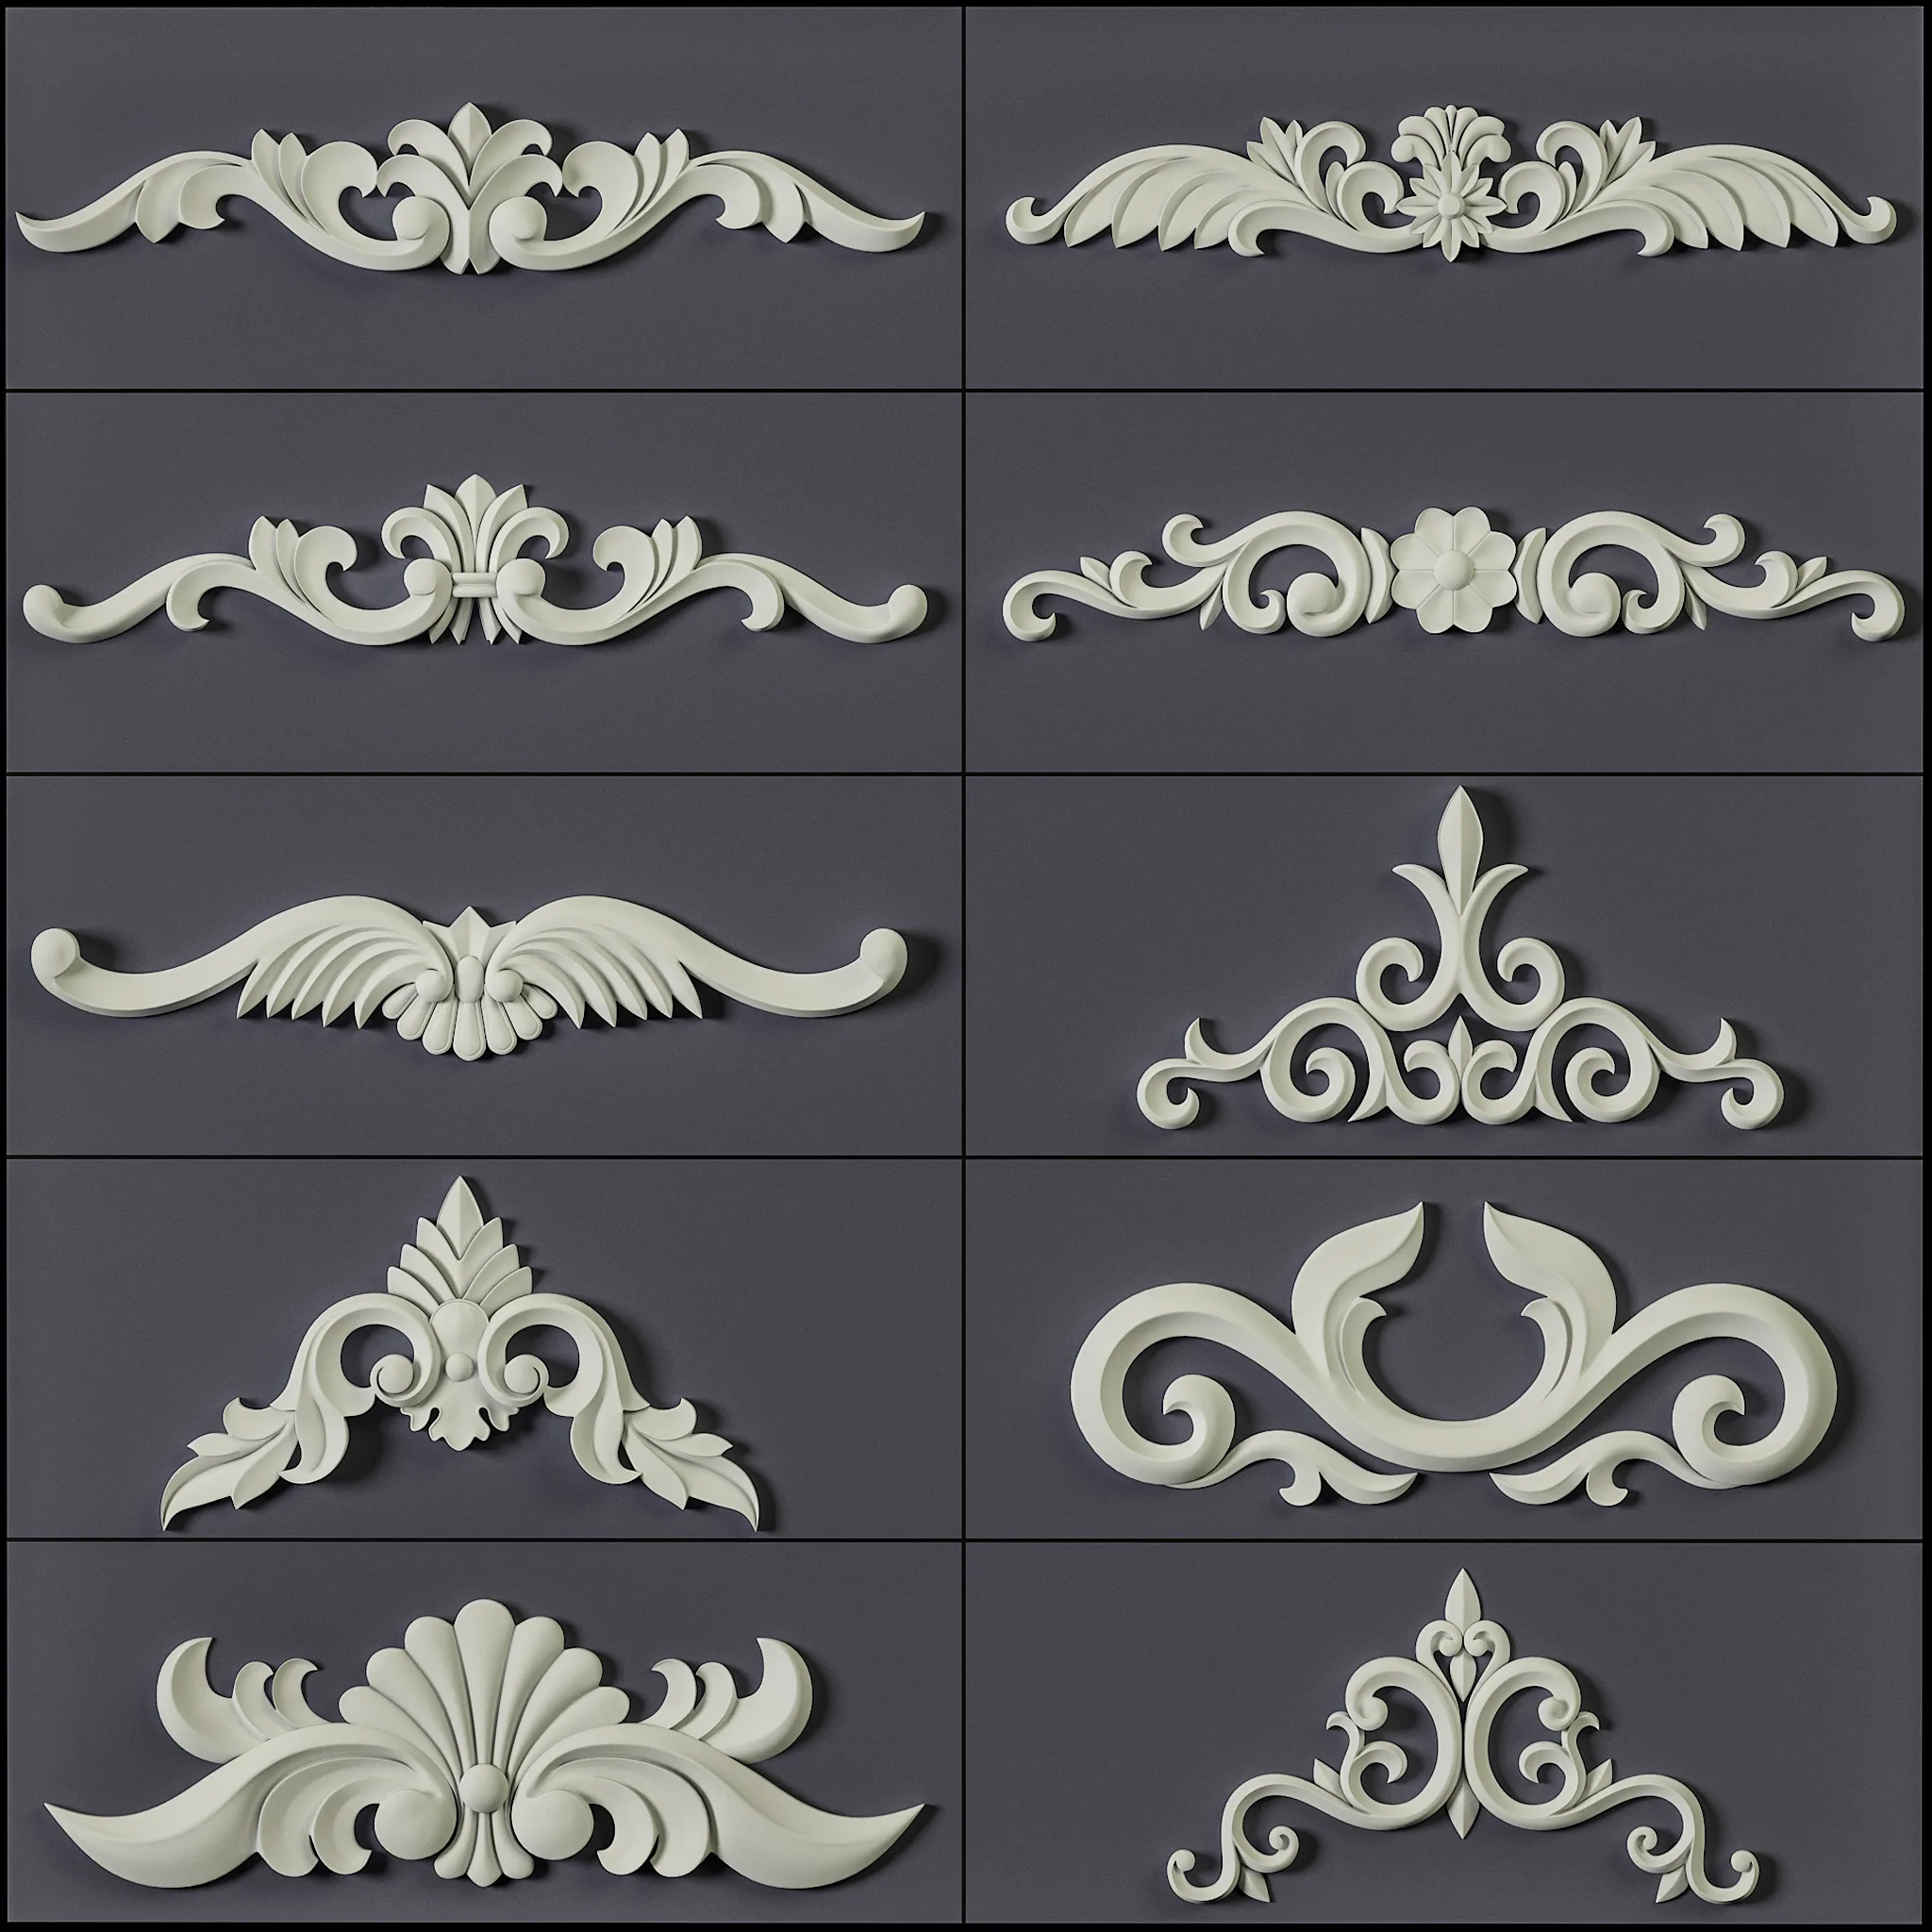 150 Ornament Brushes and Alphas Vol 01